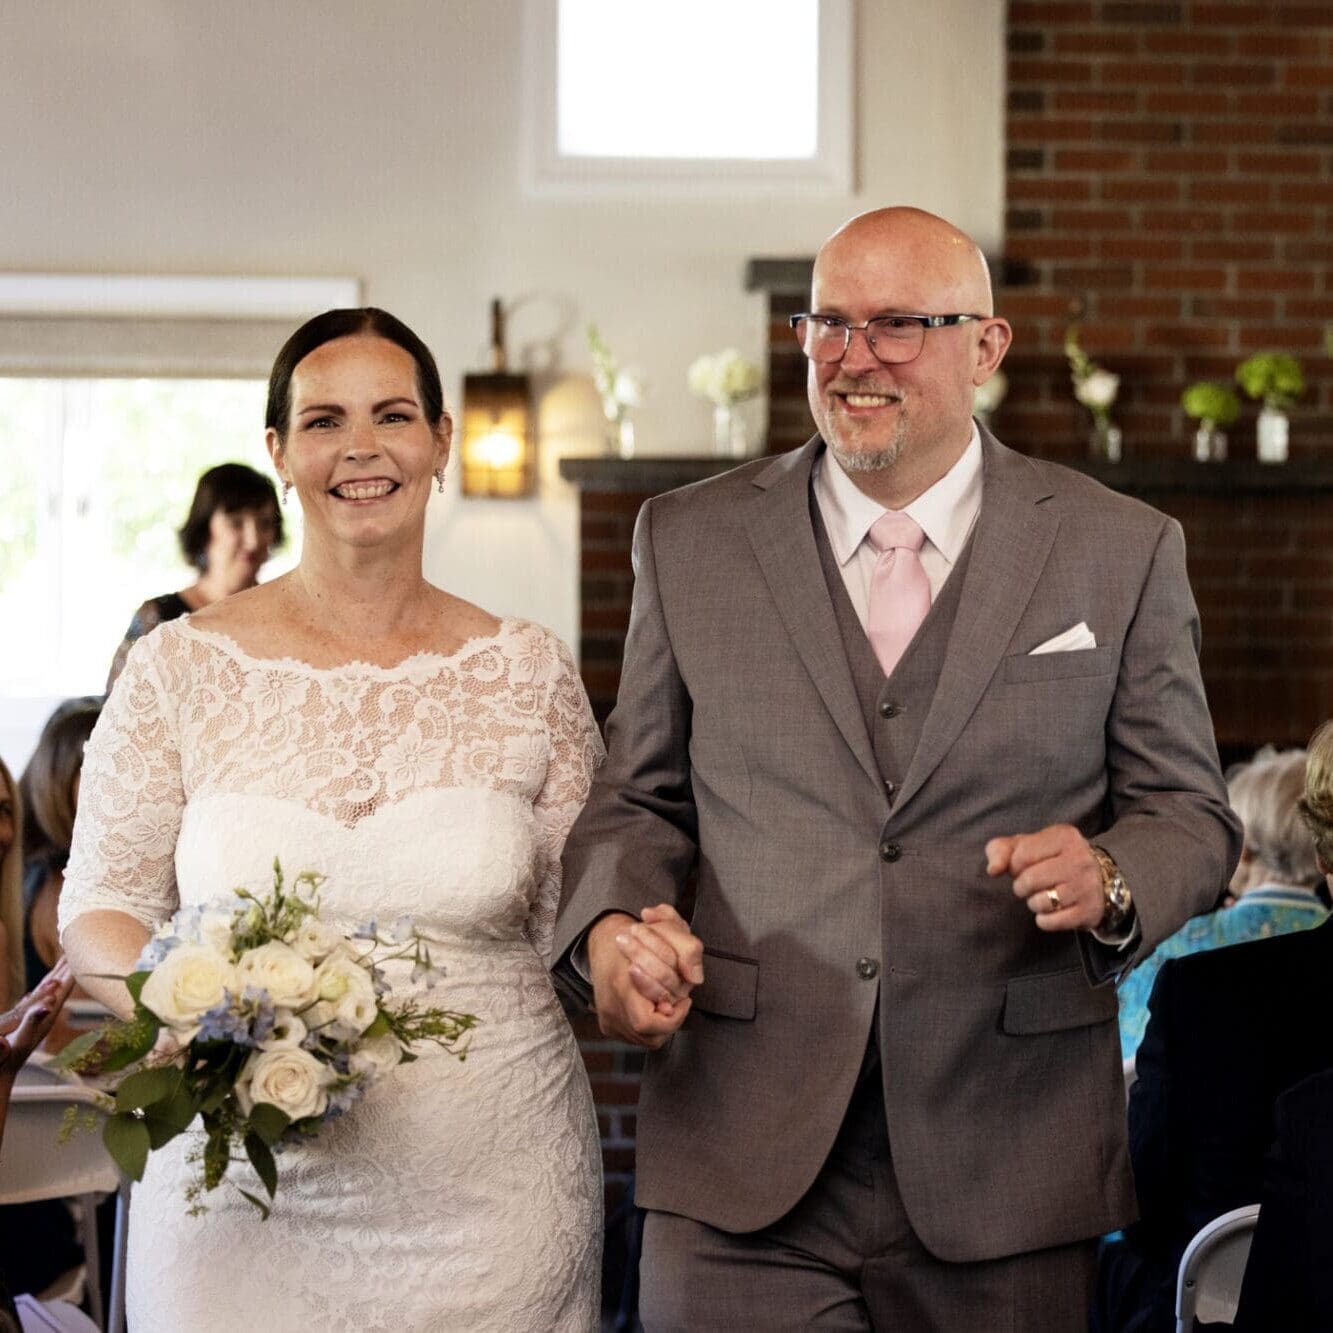 A newly married happy couple smiles as they walk down the aisle after their wedding in Westwood, Massachusetts